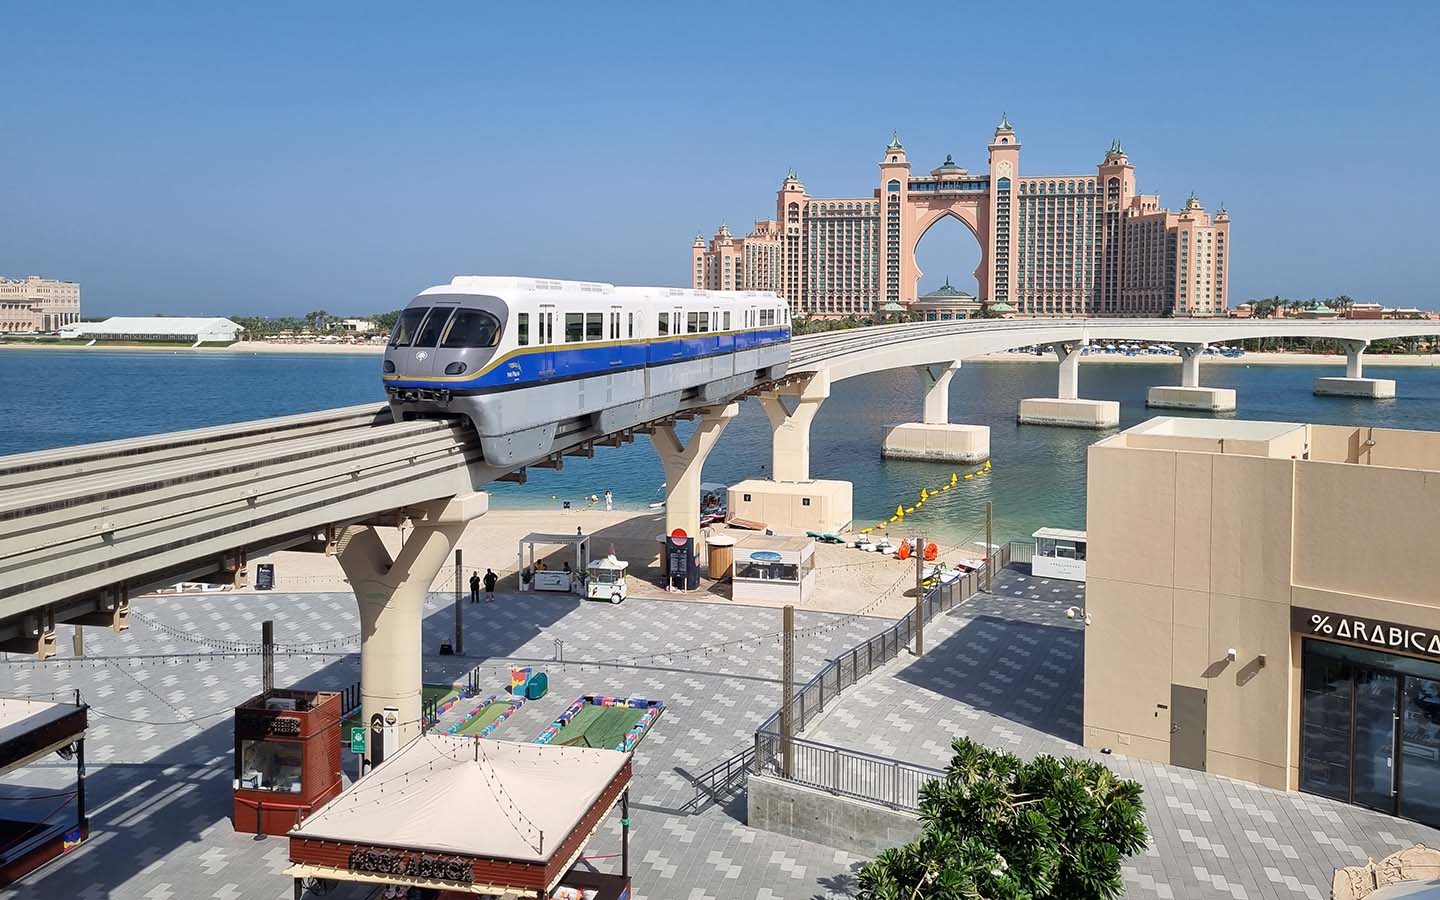 the palm monorail operates 7 days a week